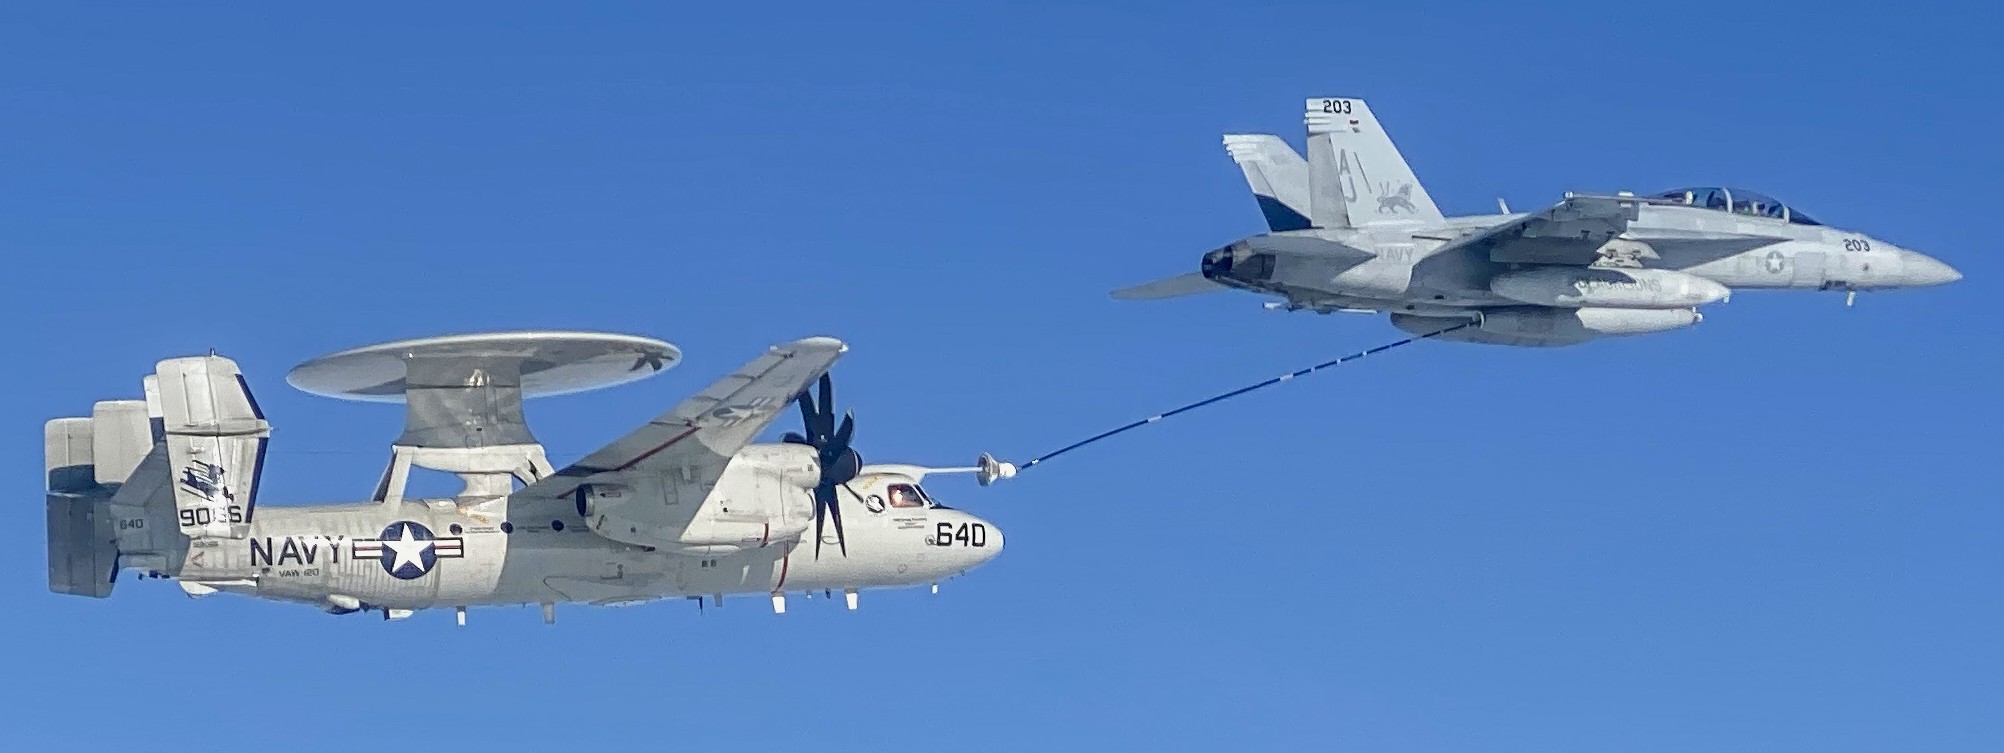 vaw-120 greyhawks airborne command control squadron e-2d advanced hawkeye replacement aerial refueling capability 17